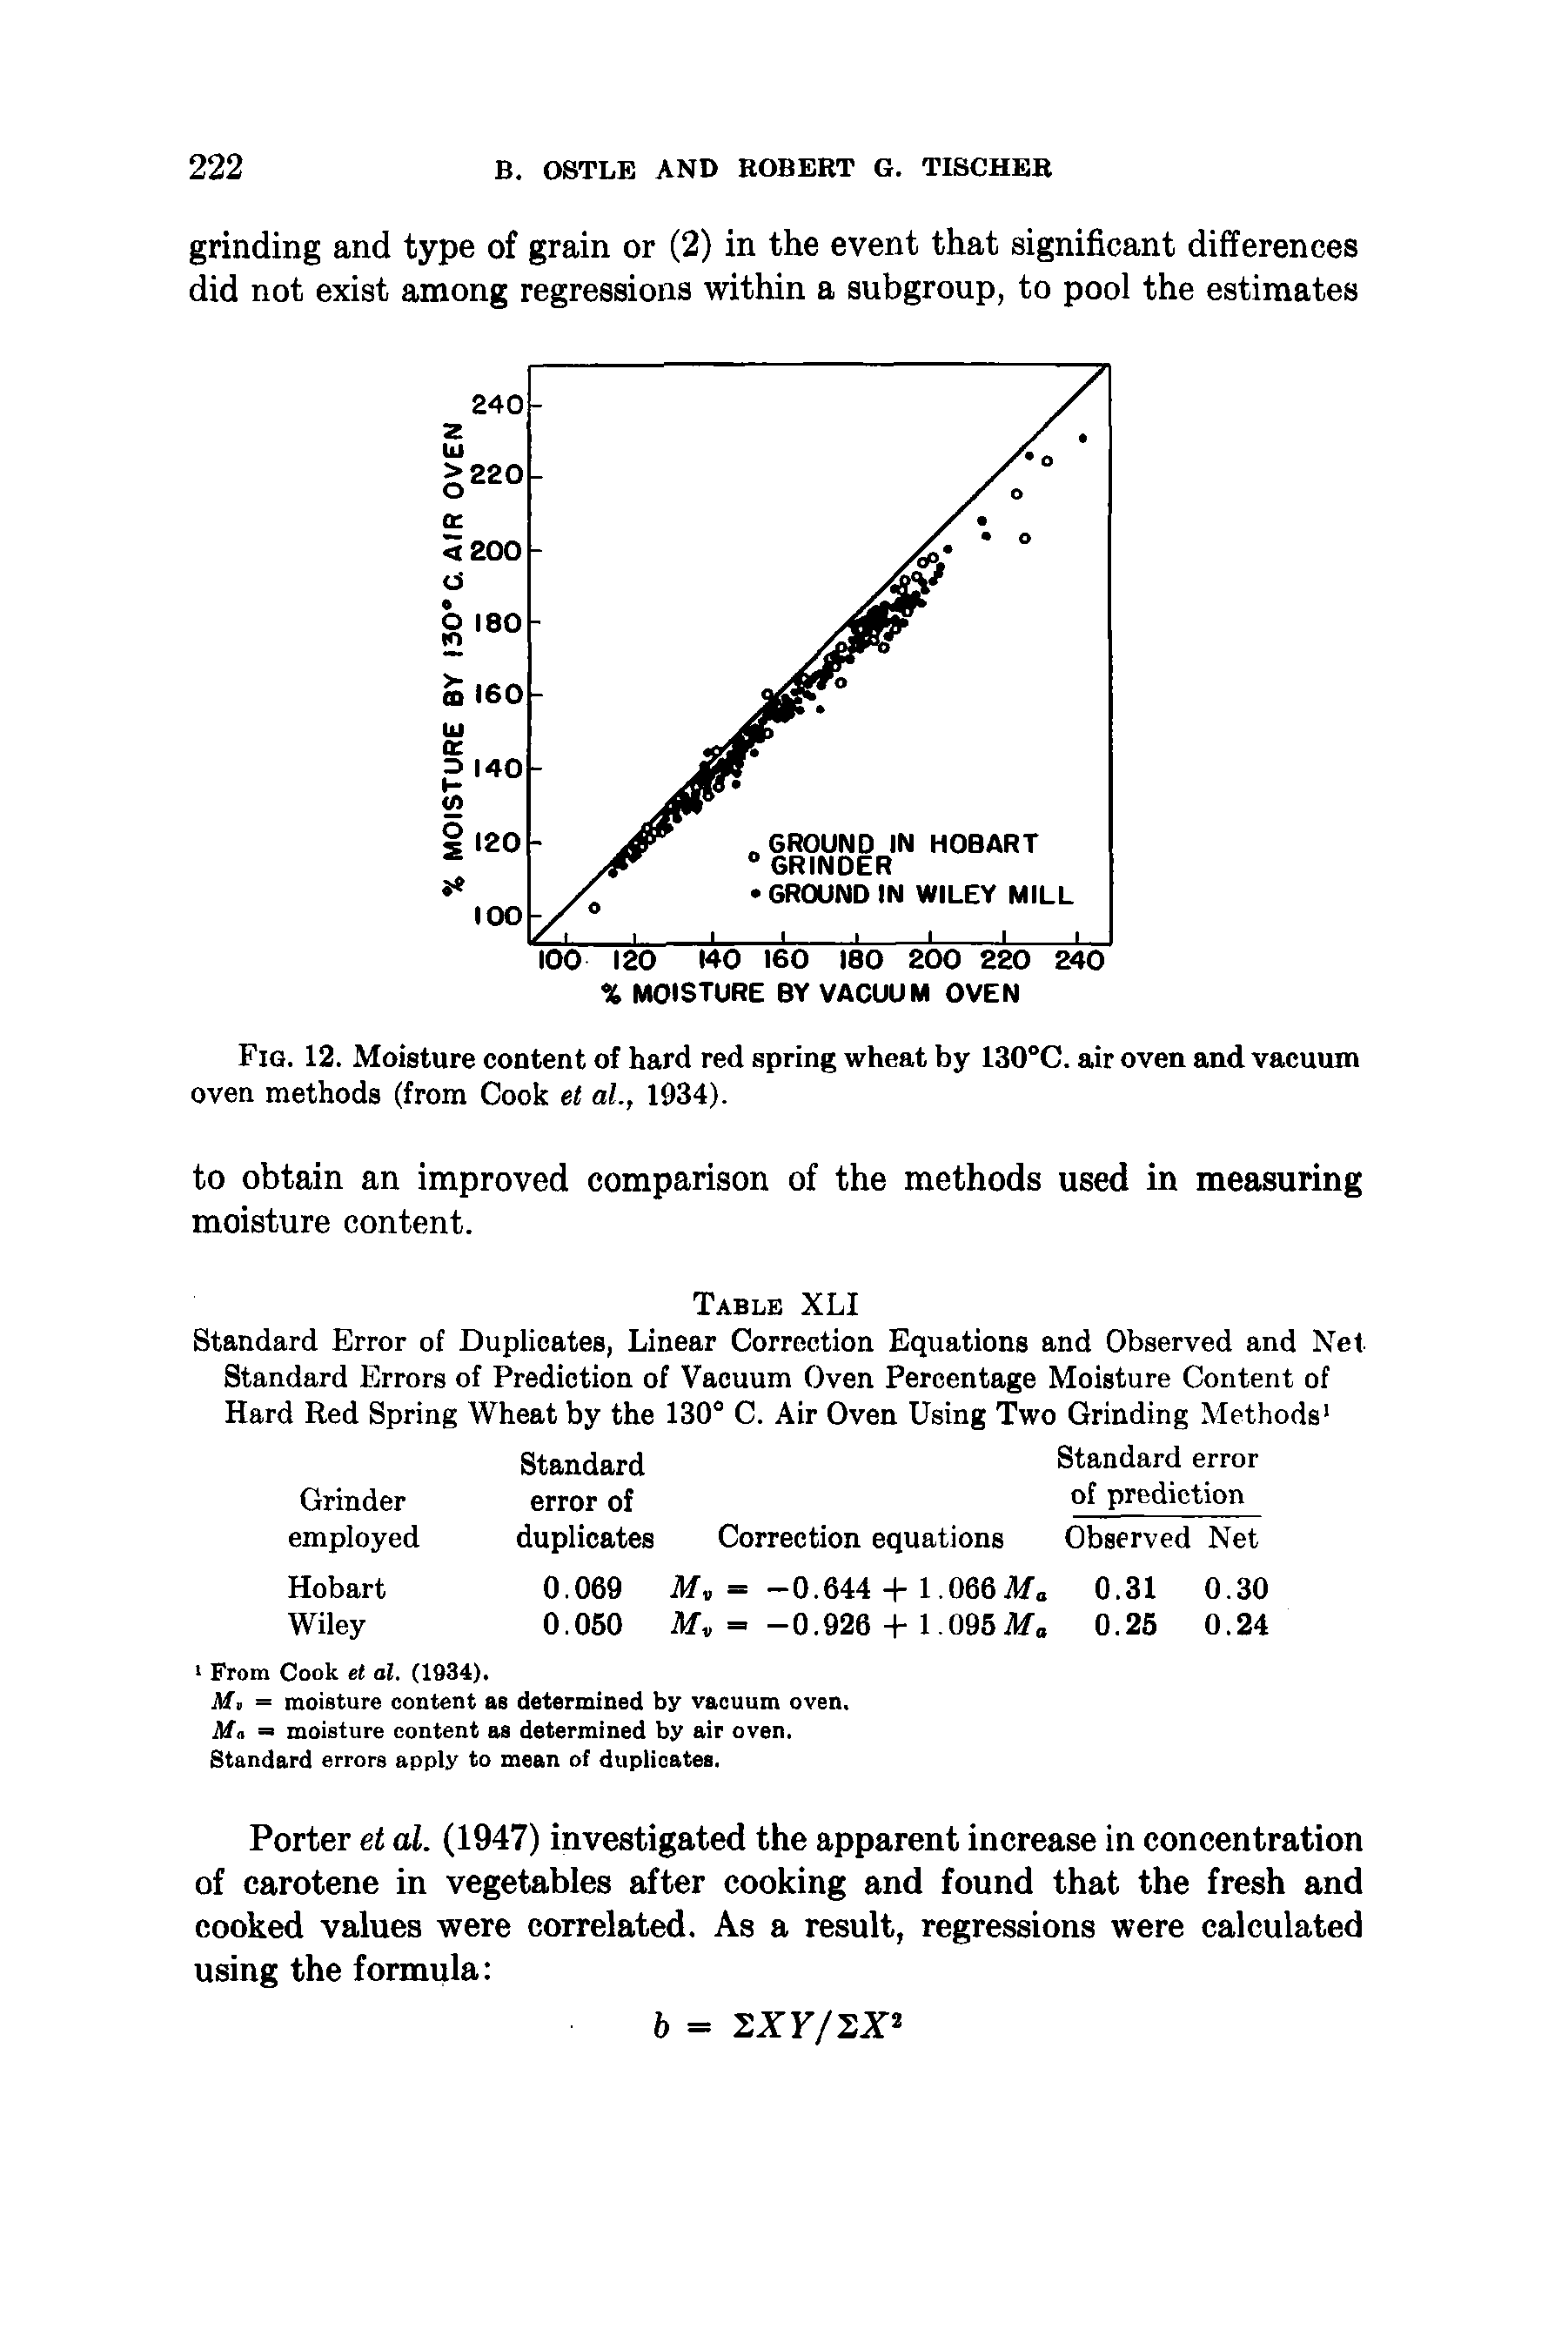 Fig. 12. Moisture content of hard red spring wheat by 130 C. air oven and vacuum oven methods (from Cook et al., 1934).